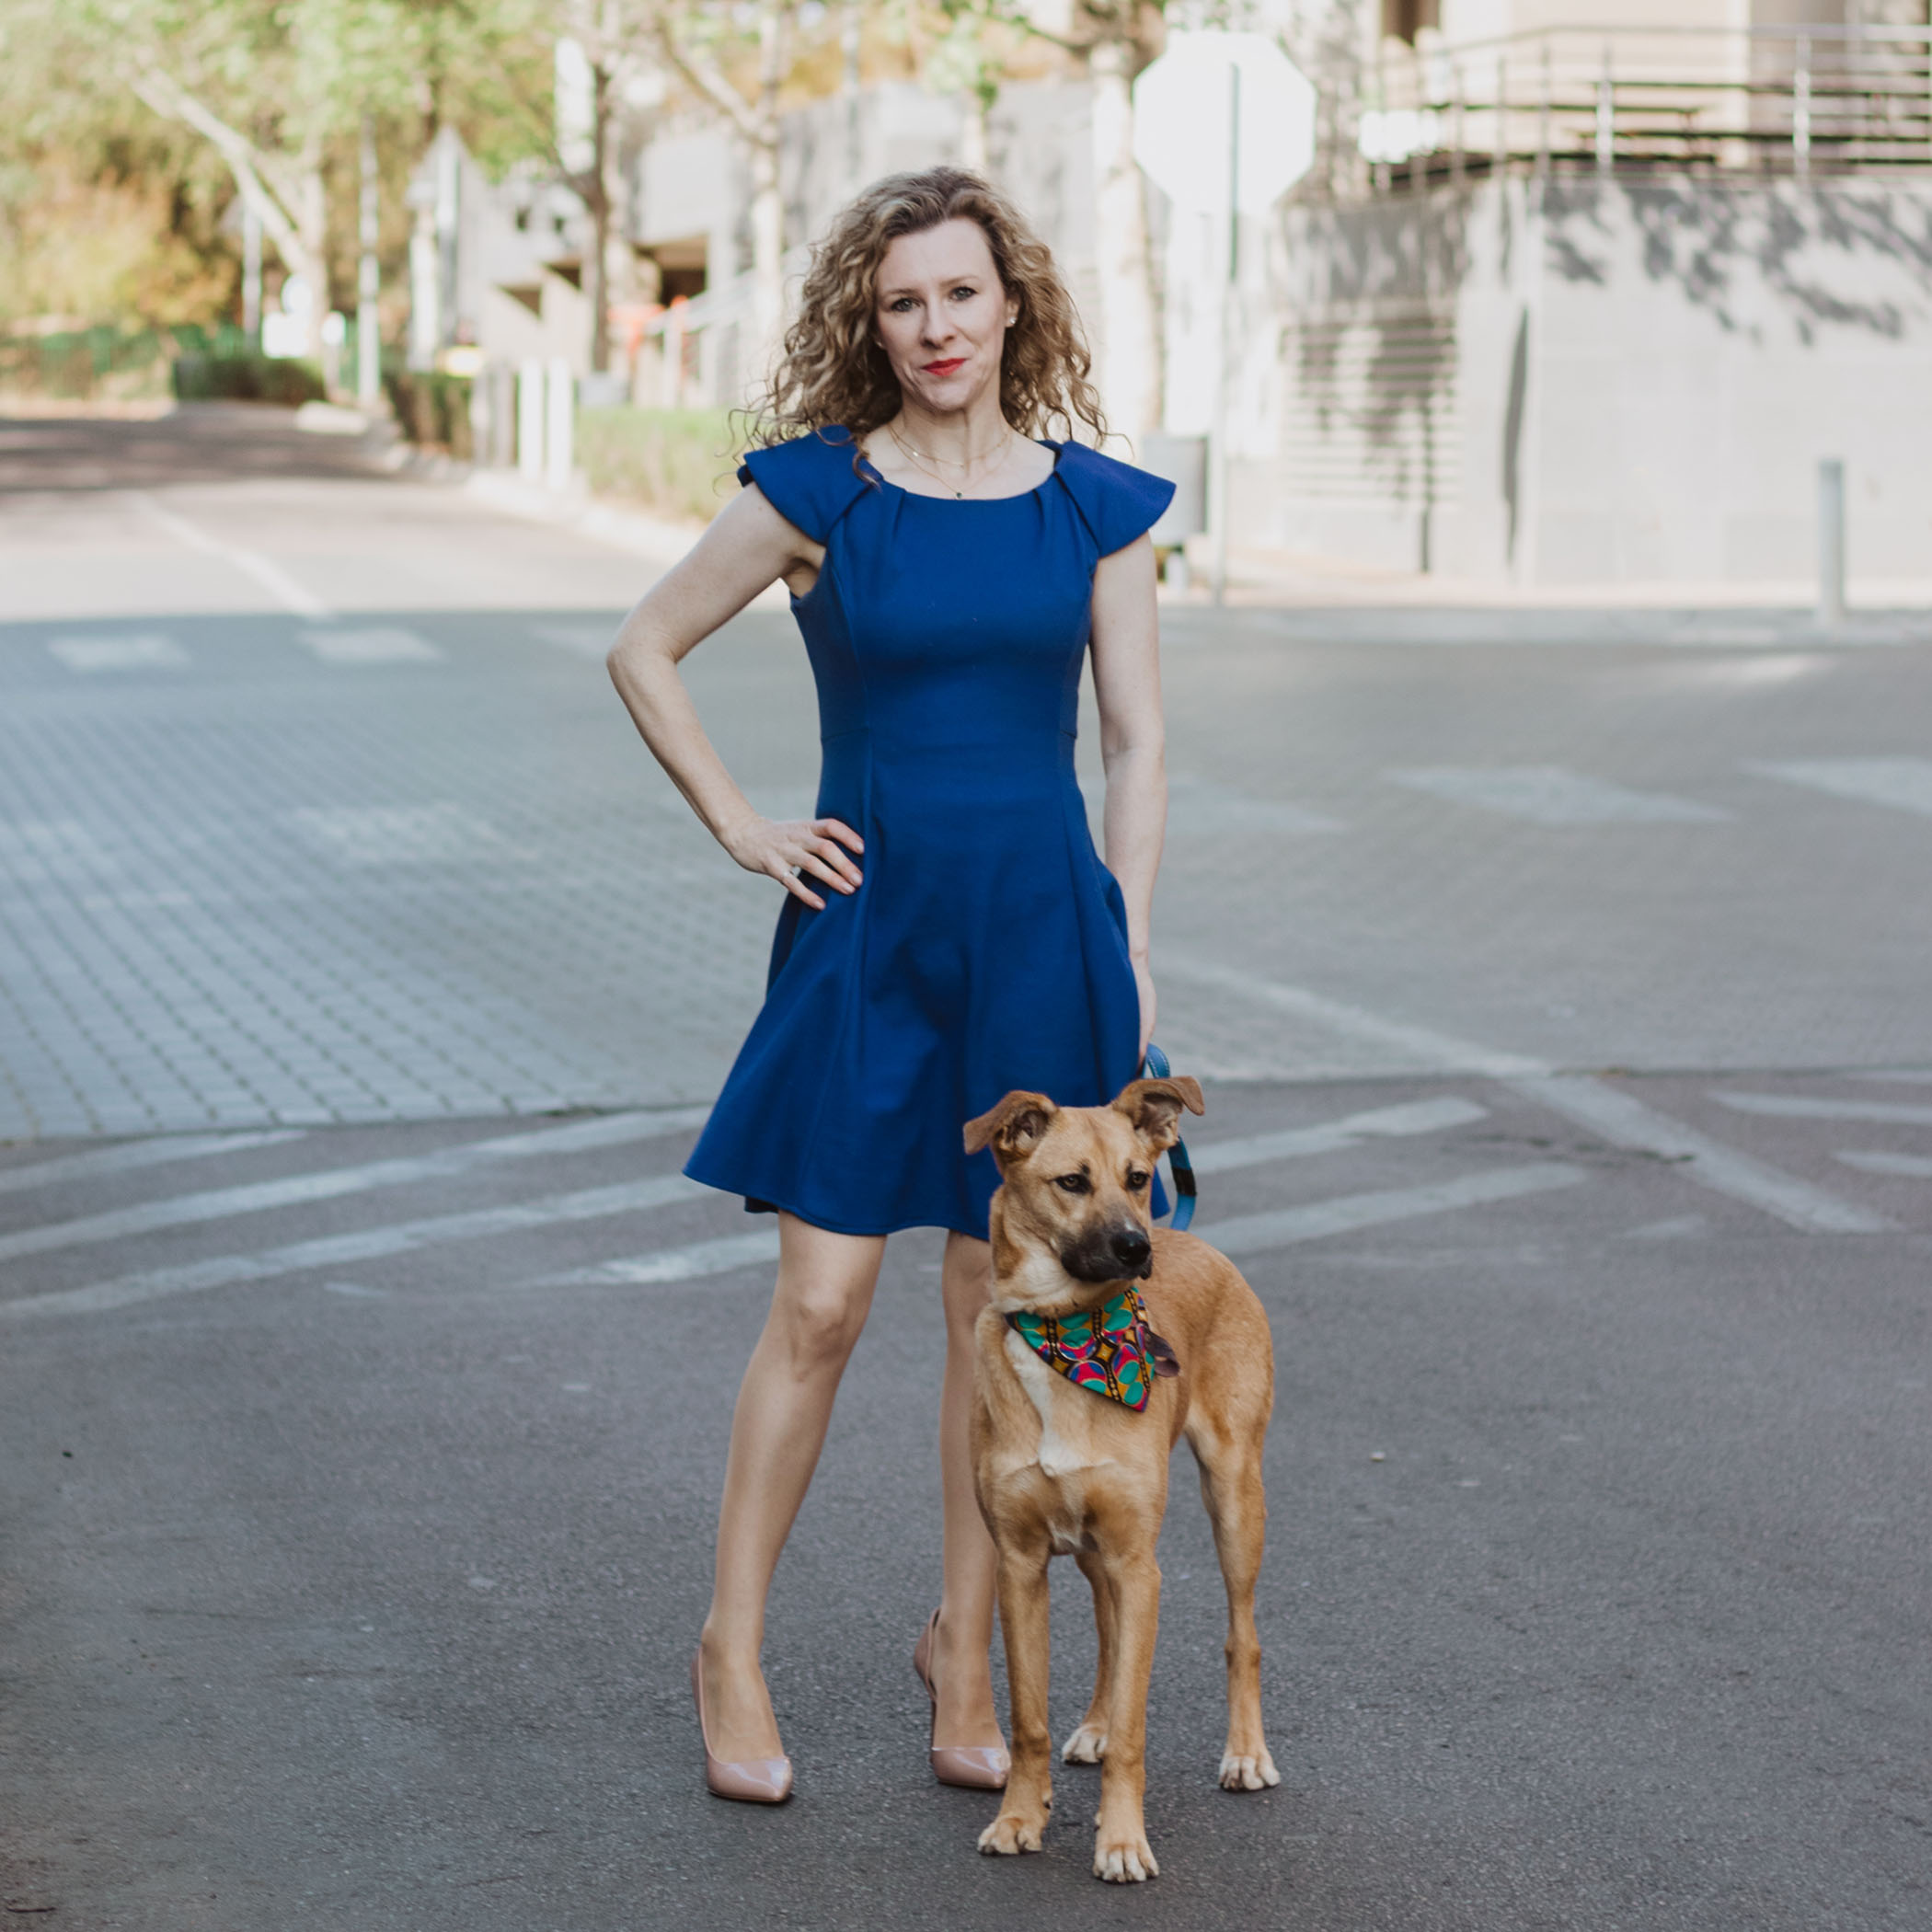 Life and business coach Emma O'Brien with her dog, Ziggy